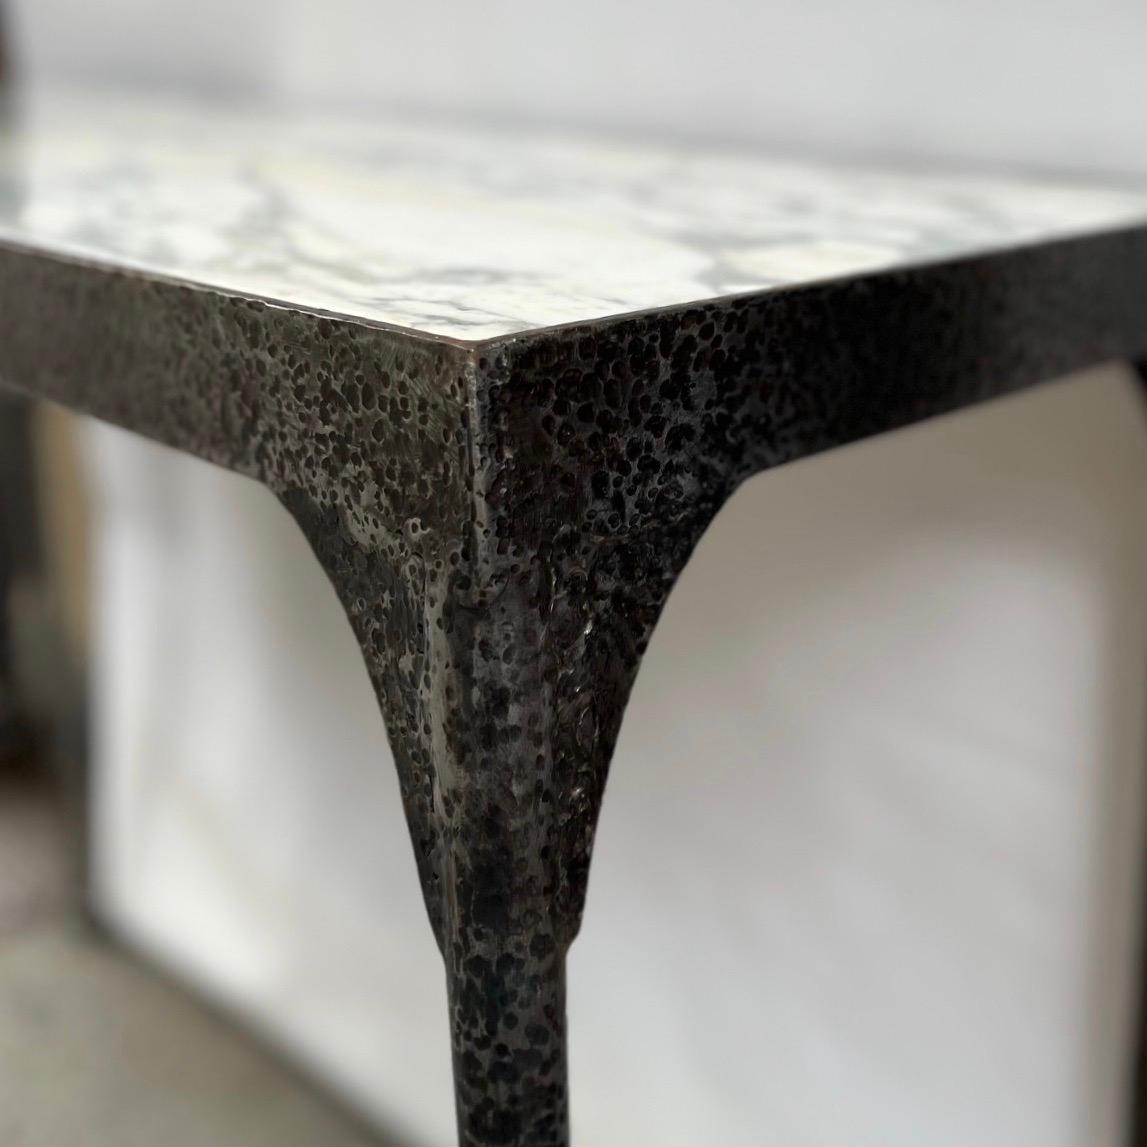 A pair of circa 1960's Italian hammered iron consoles with marble tops. Sold individually.

Measurements:
Height: 34